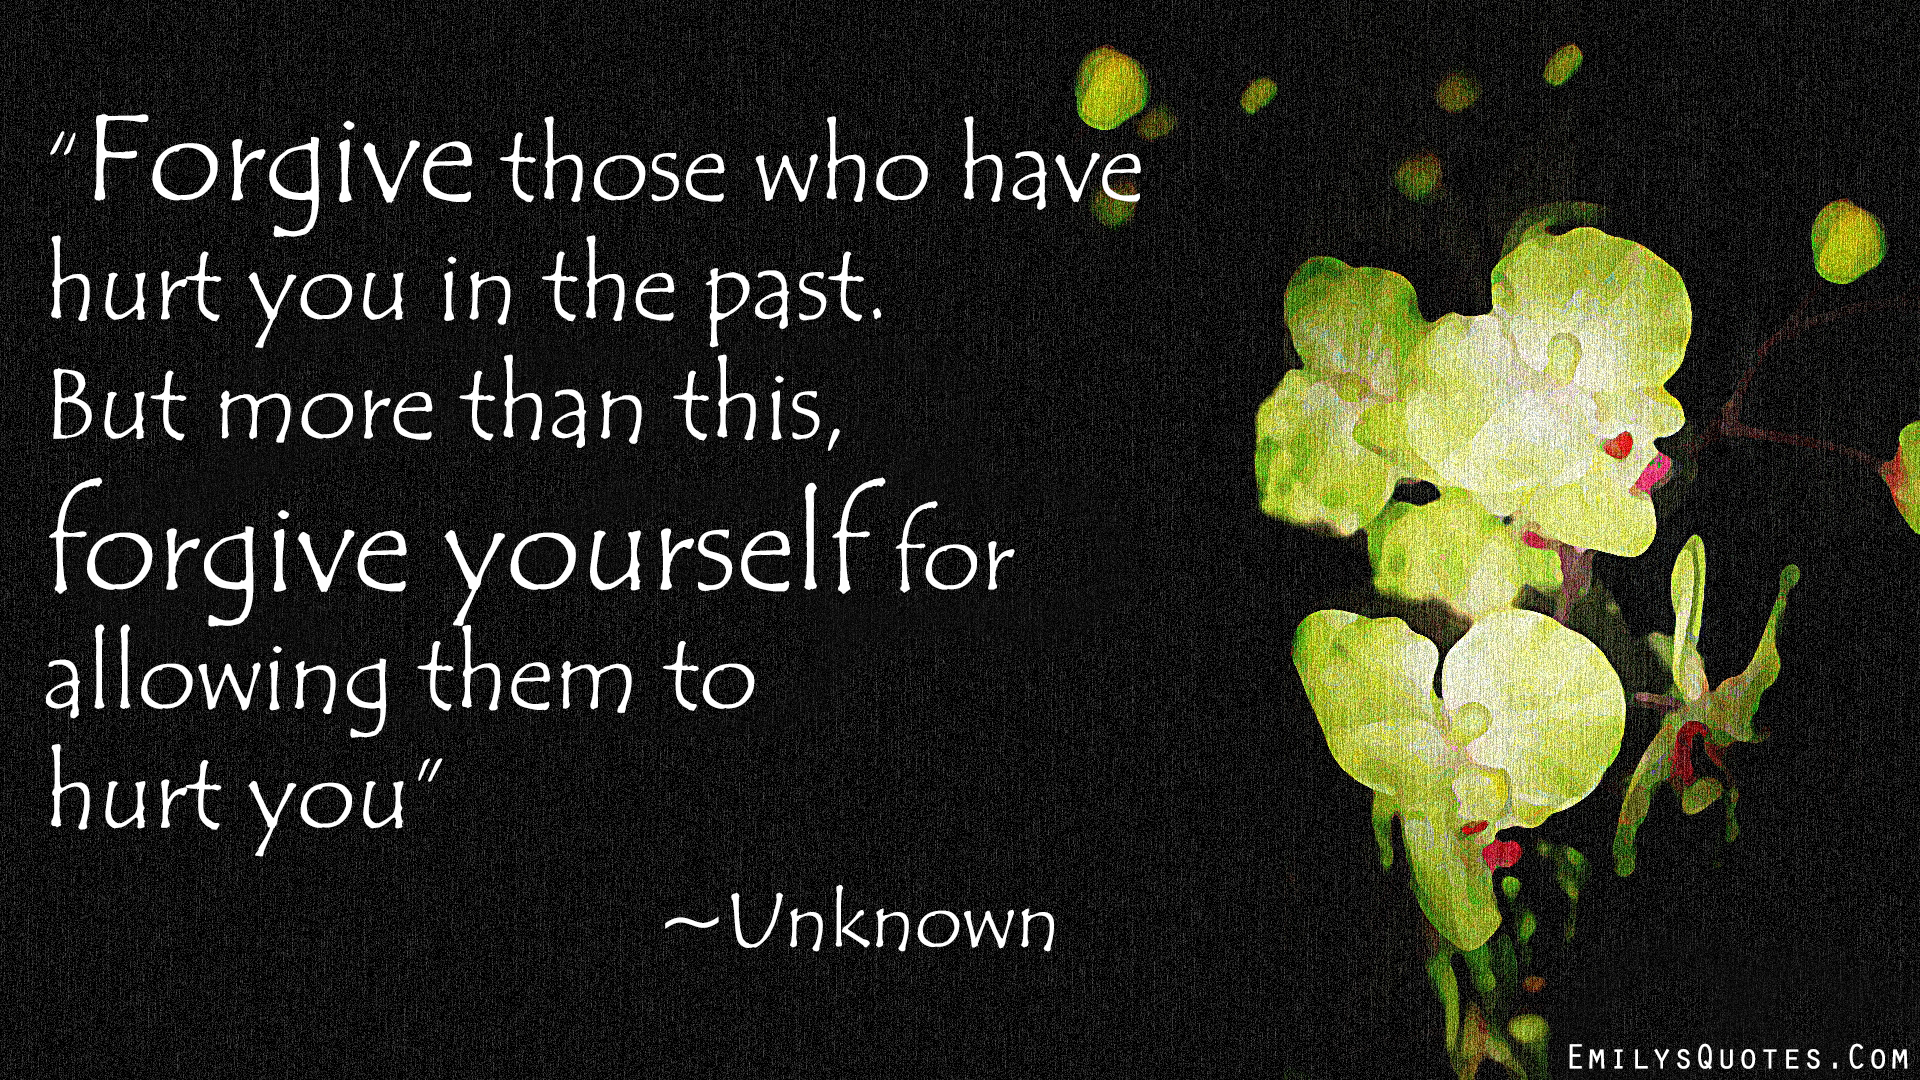 Forgive those who have hurt you in the past. But more than this, forgive yourself for allowing them to hurt you